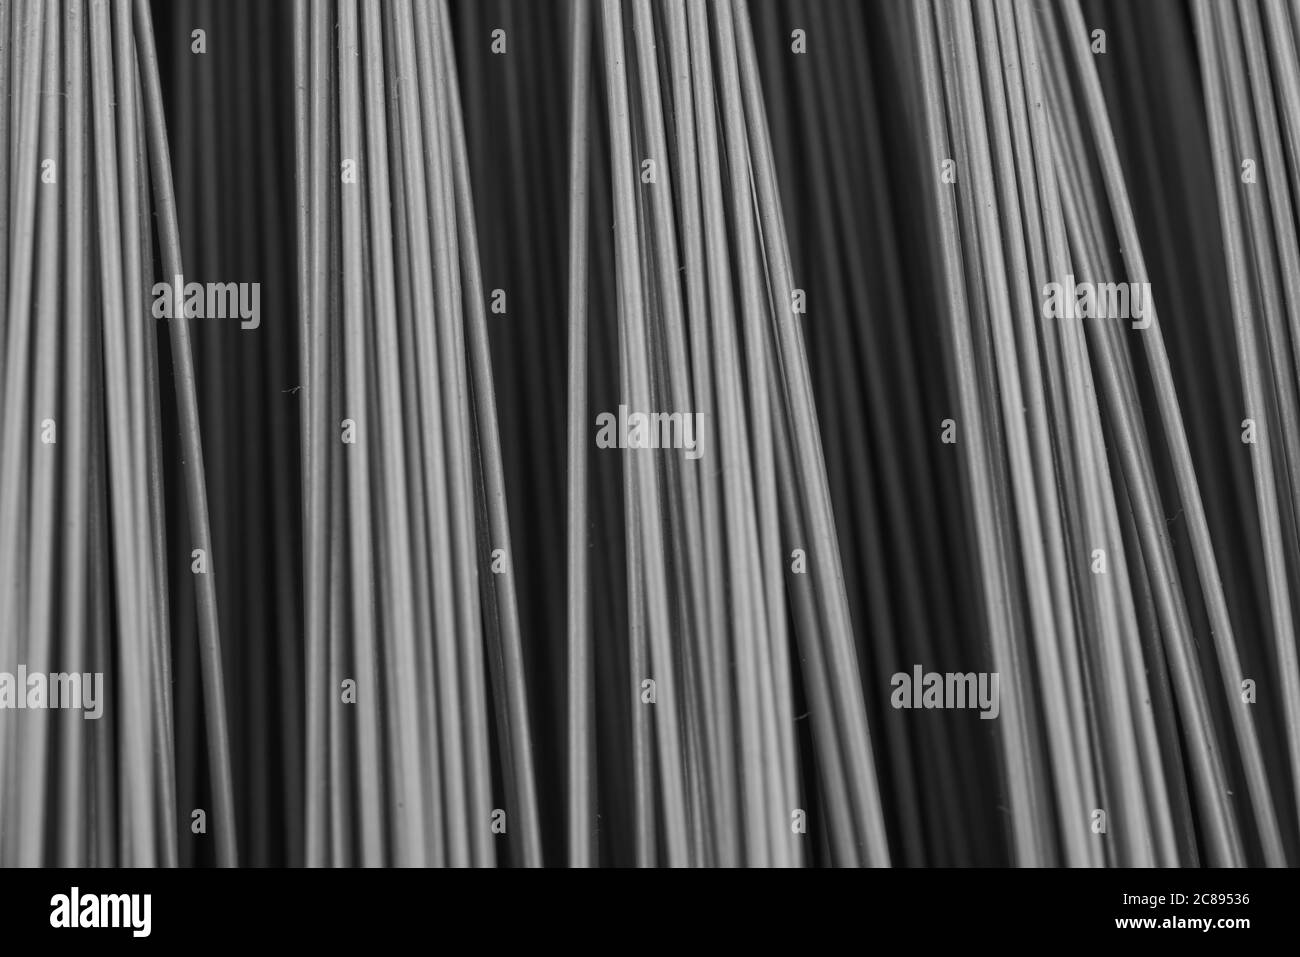 Broom Black and White Stock Photos & Images - Alamy